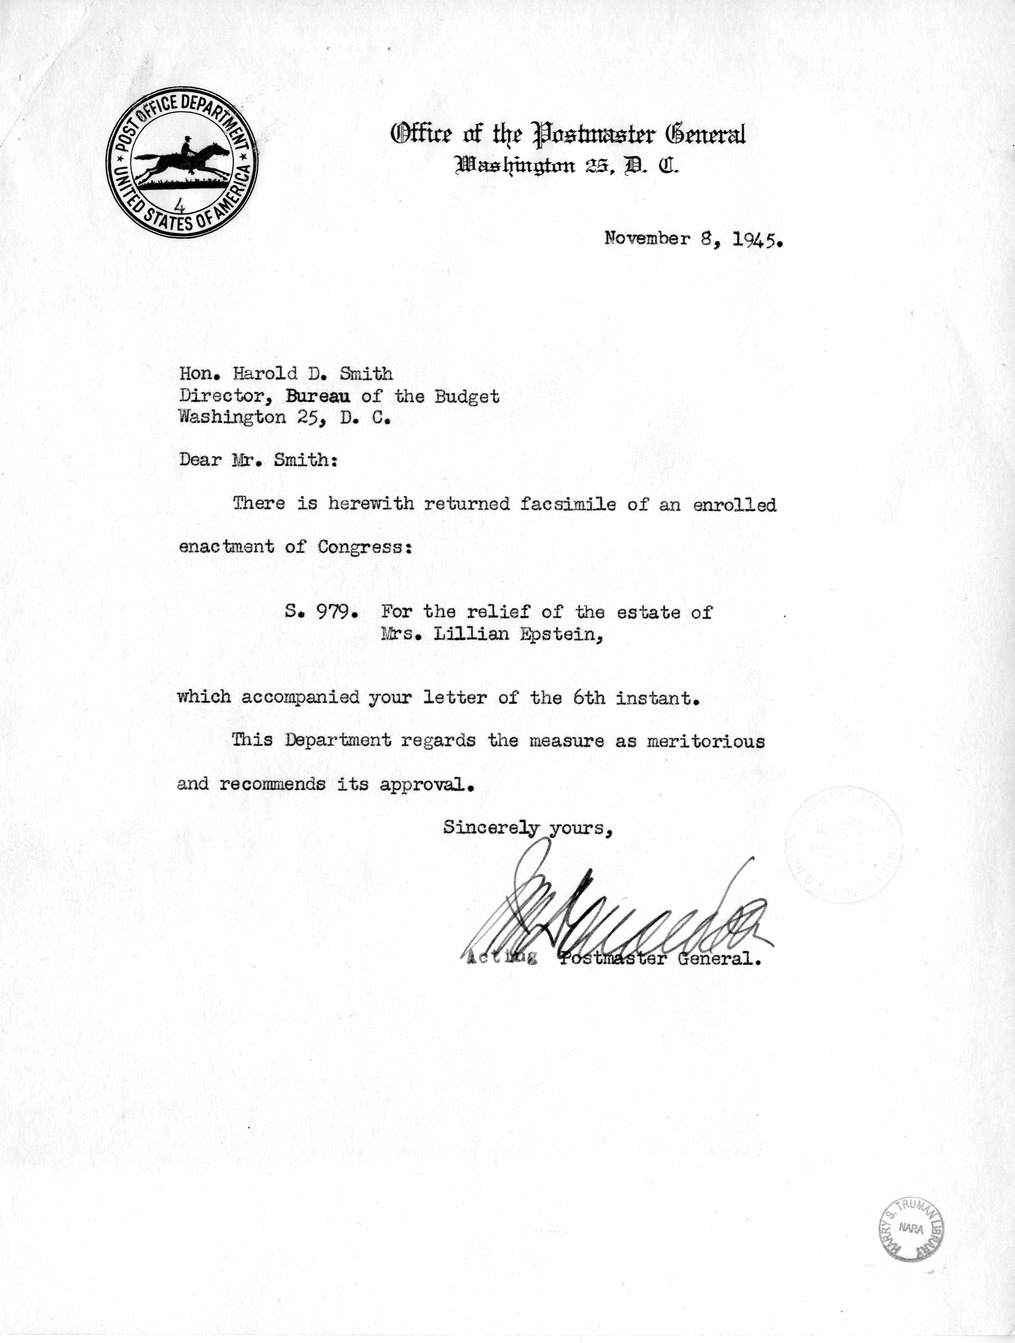 Memorandum from Frederick J. Bailey to M. C. Latta, S. 979, For the Relief of the Estate of Mrs. Lillian Epstein, with Attachments